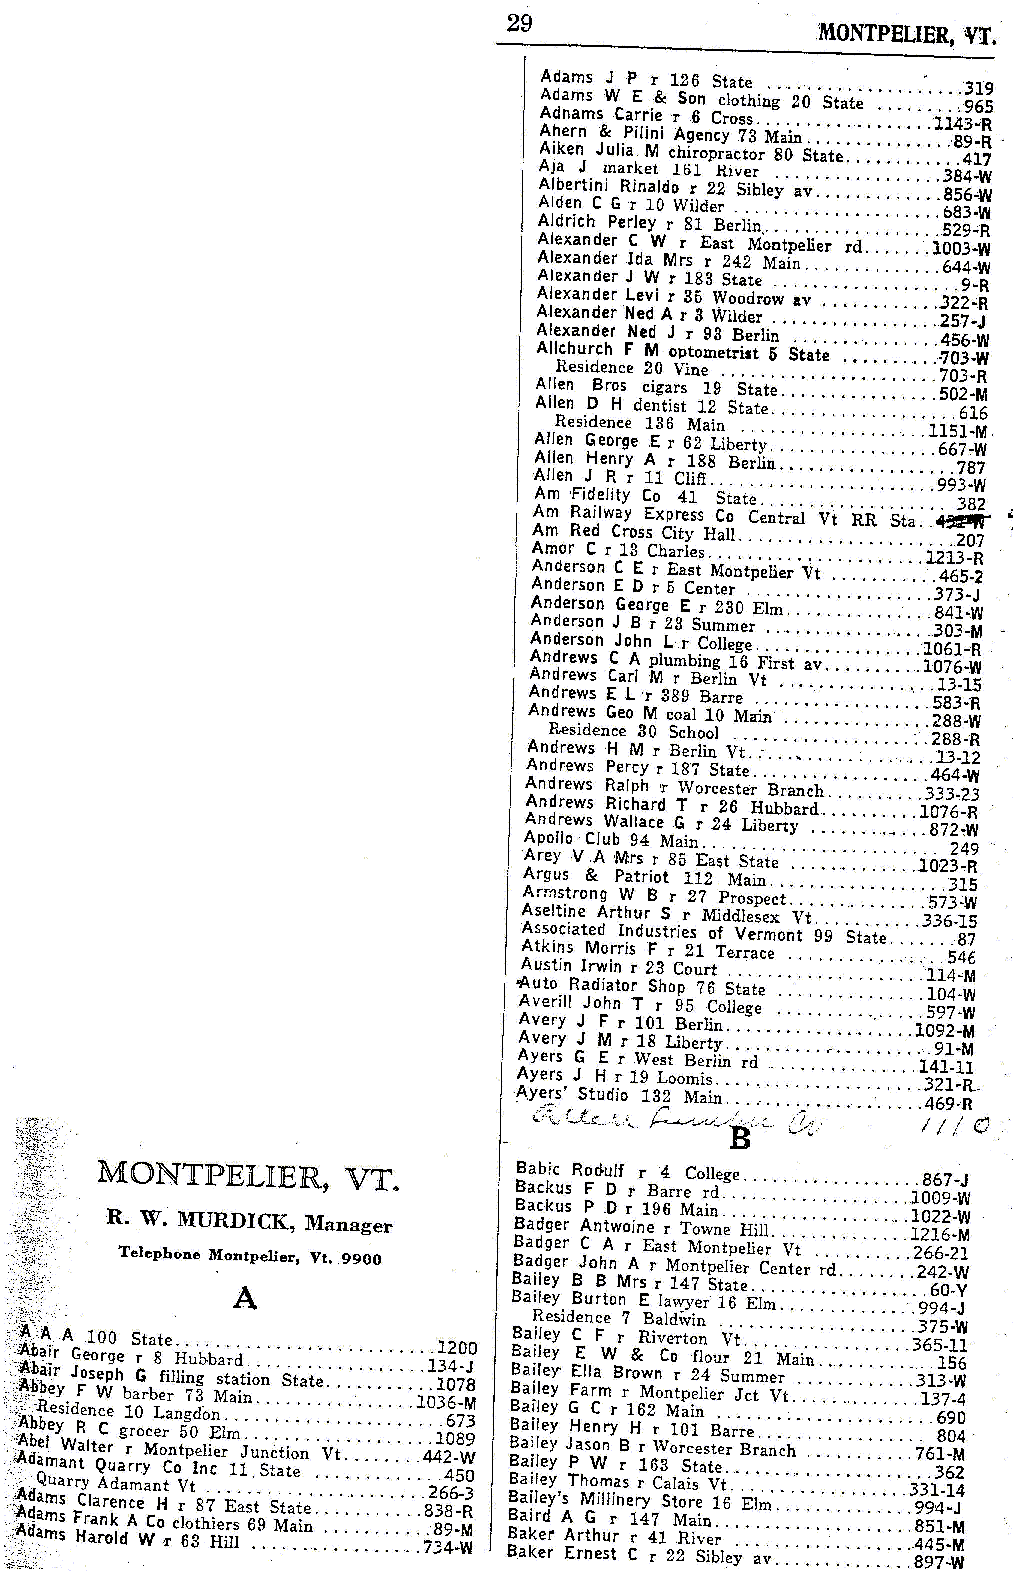 1928 Montpelier Vt Telephone Book - Page 29